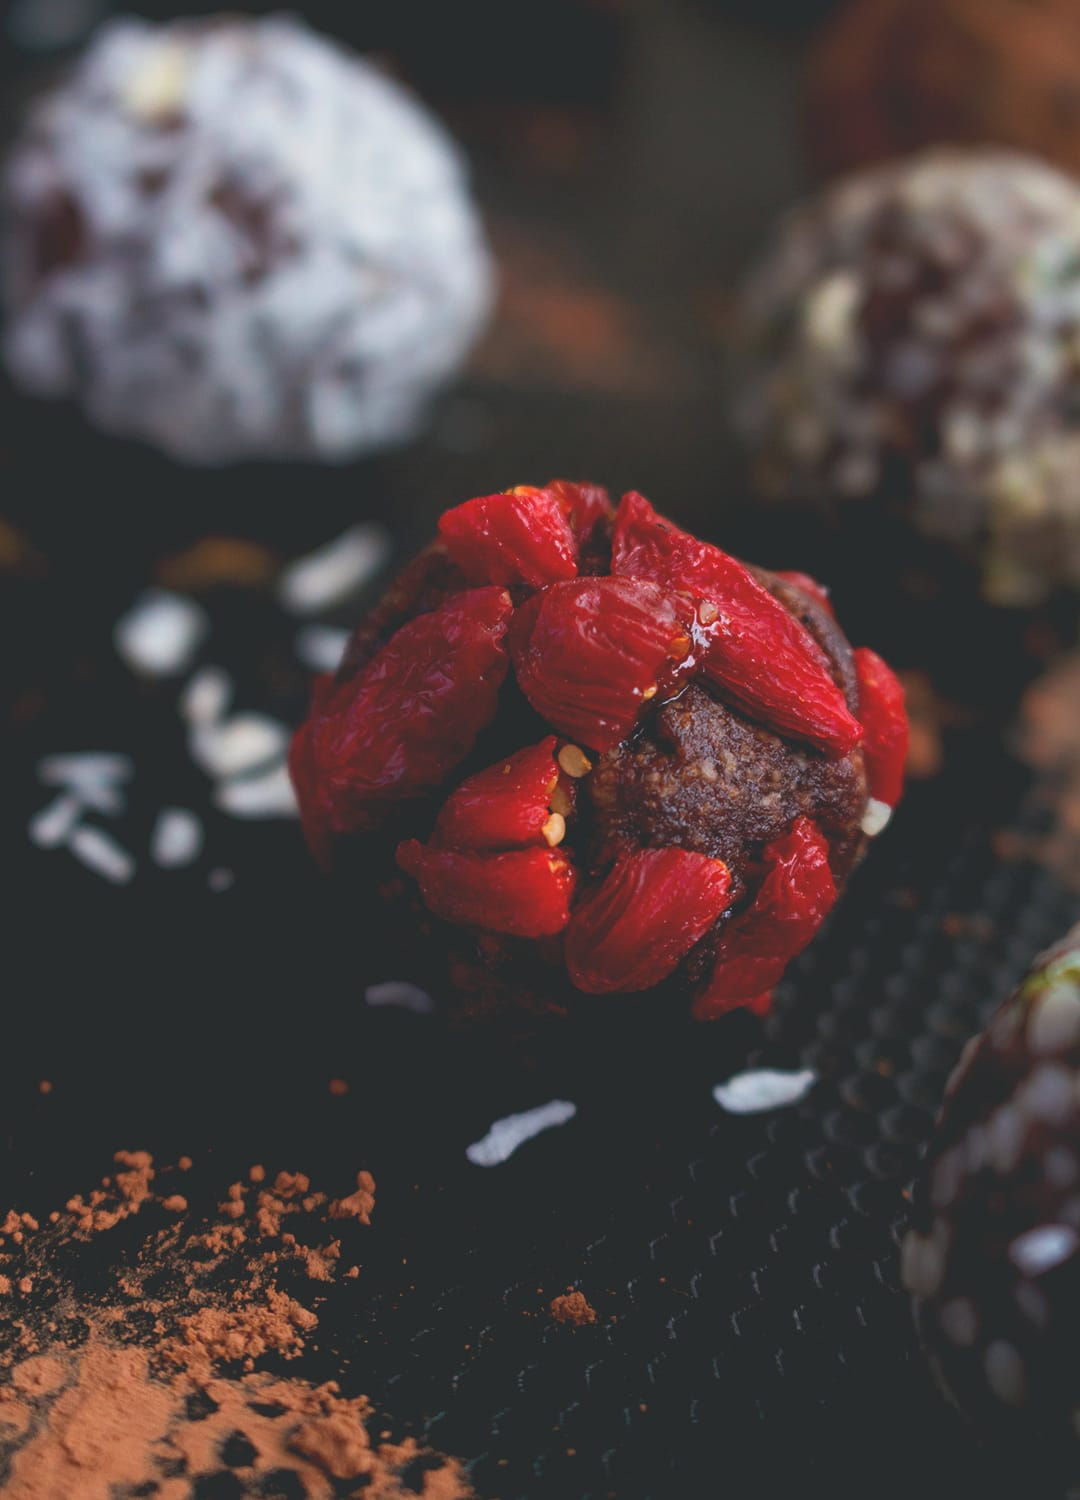 Chocolate Hazelnut Bites - sweet and chocolatey bliss balls, delicious any time of the year. A perfect snack for busy days. Vegan and absolutely heavenly! | thehealthfulideas.com